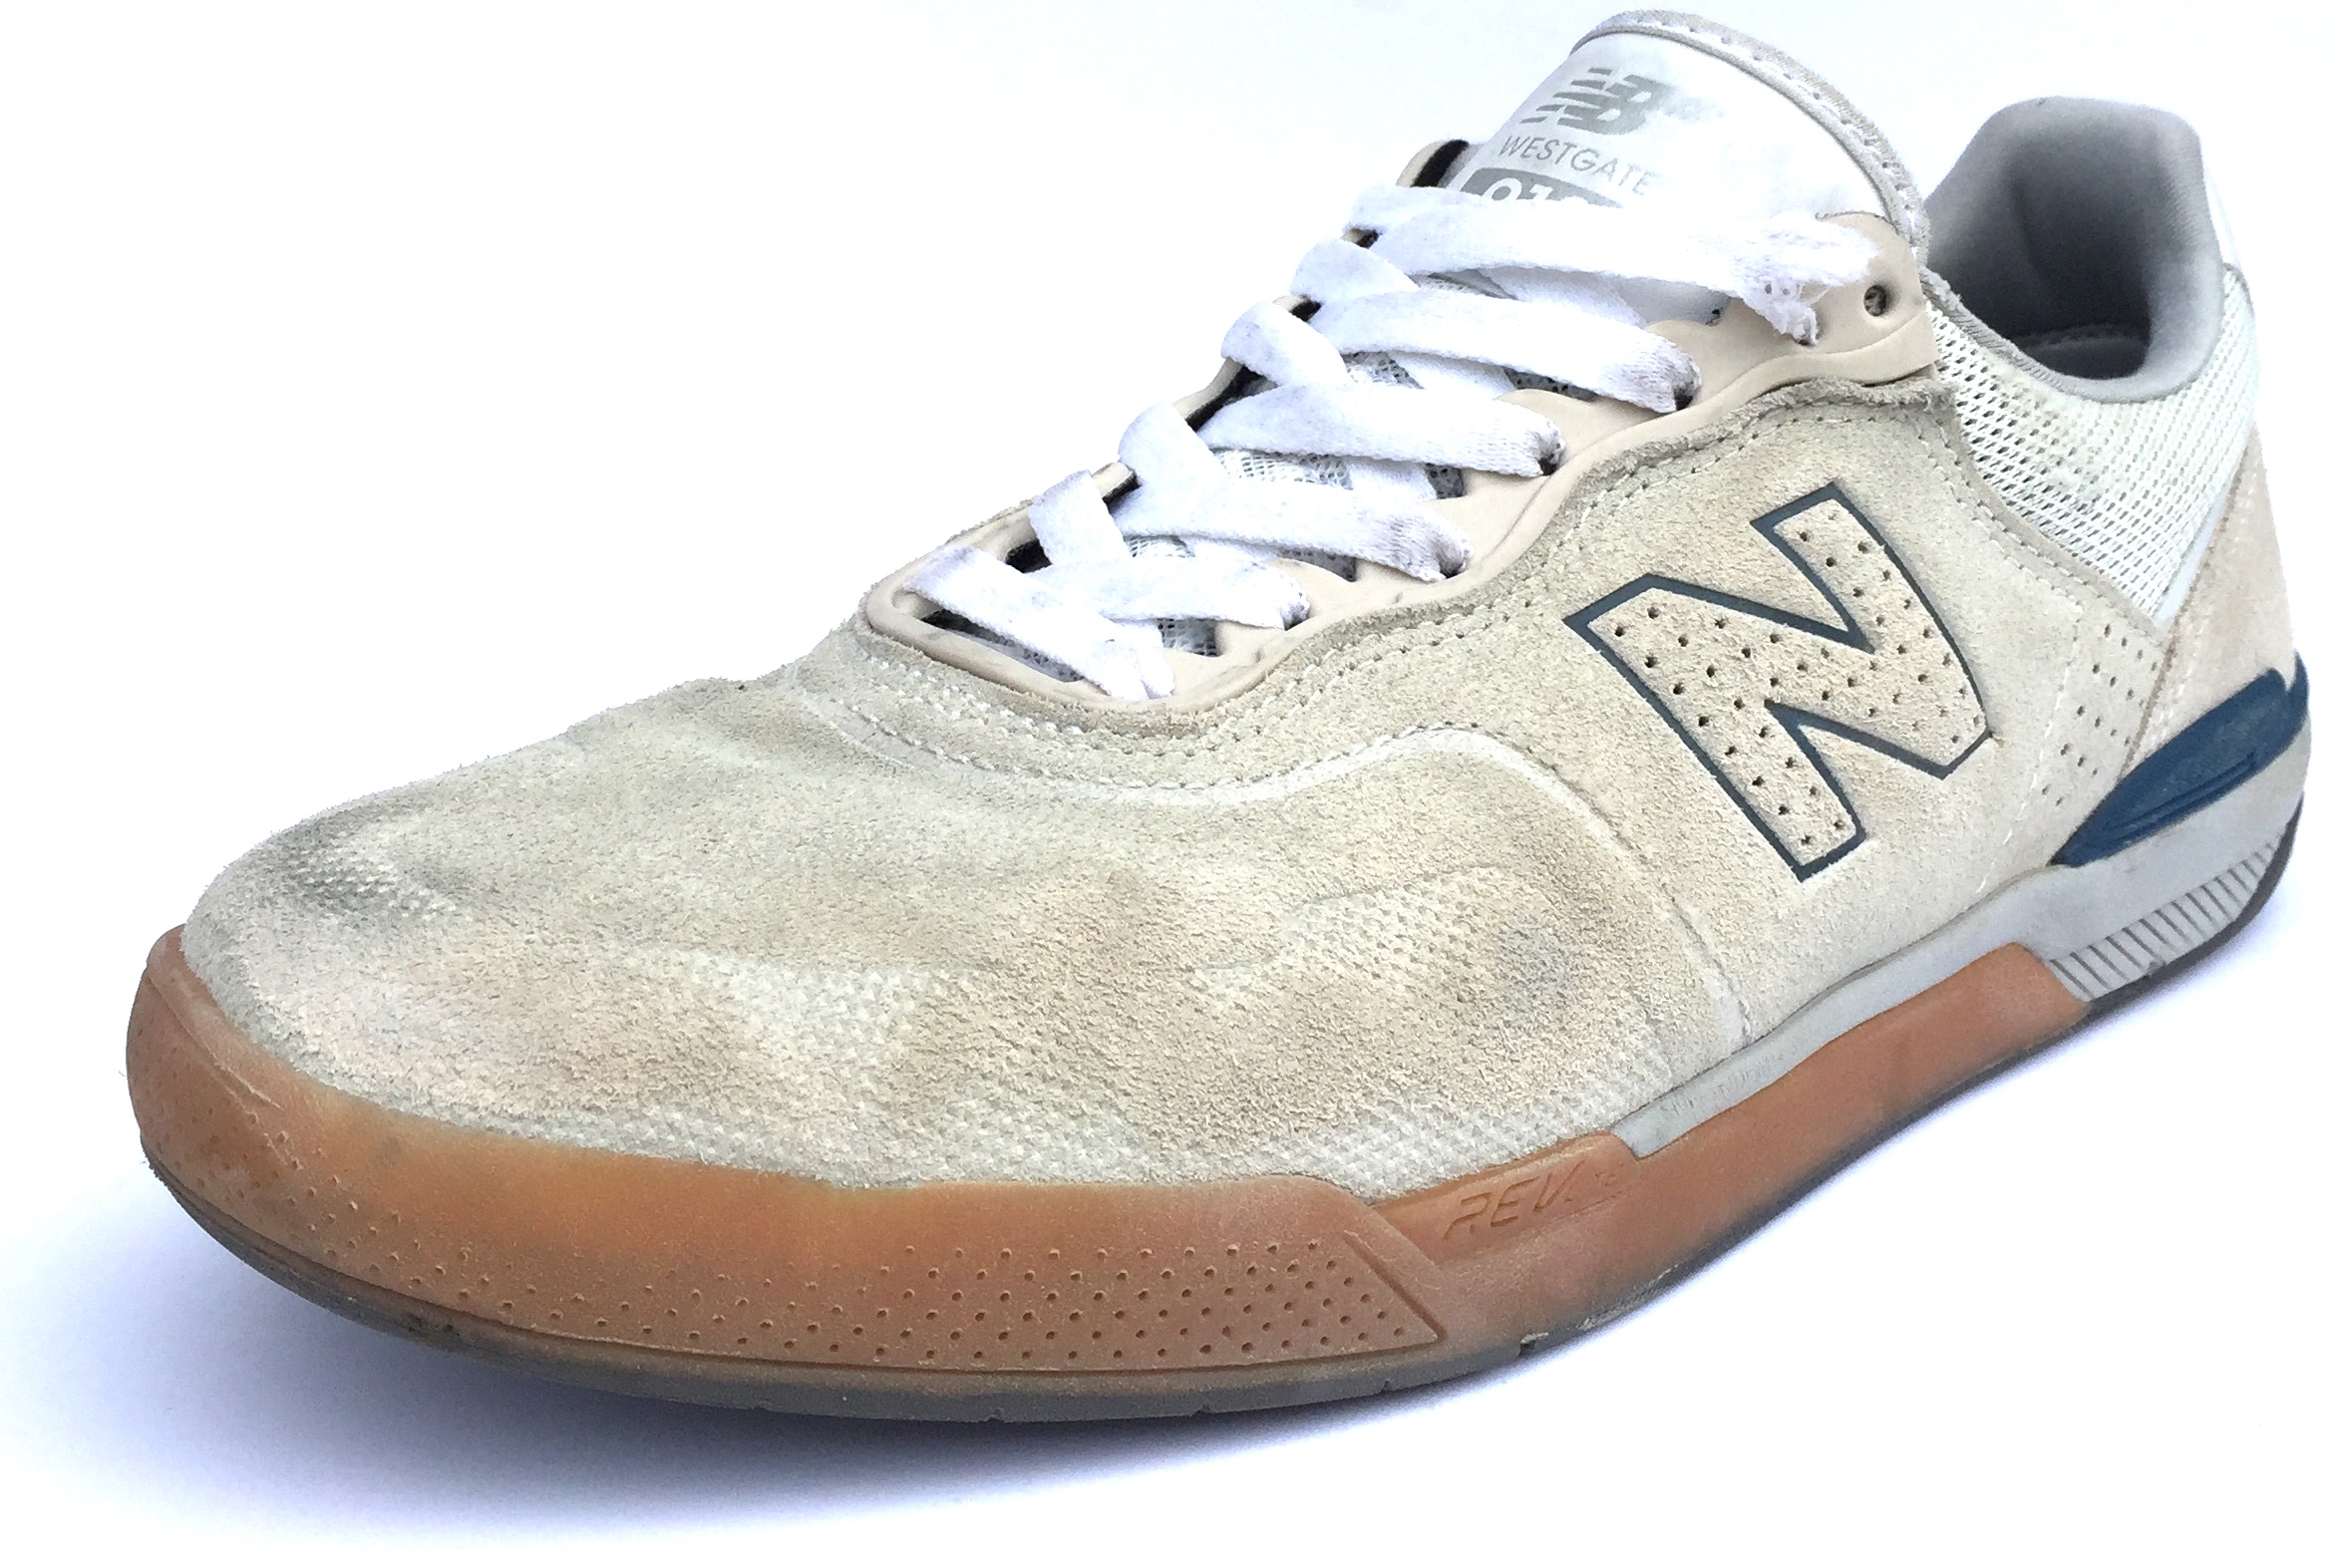 Cambiable Bonito profundo NB# Westagte 913 - Weartested - detailed skate shoe reviews